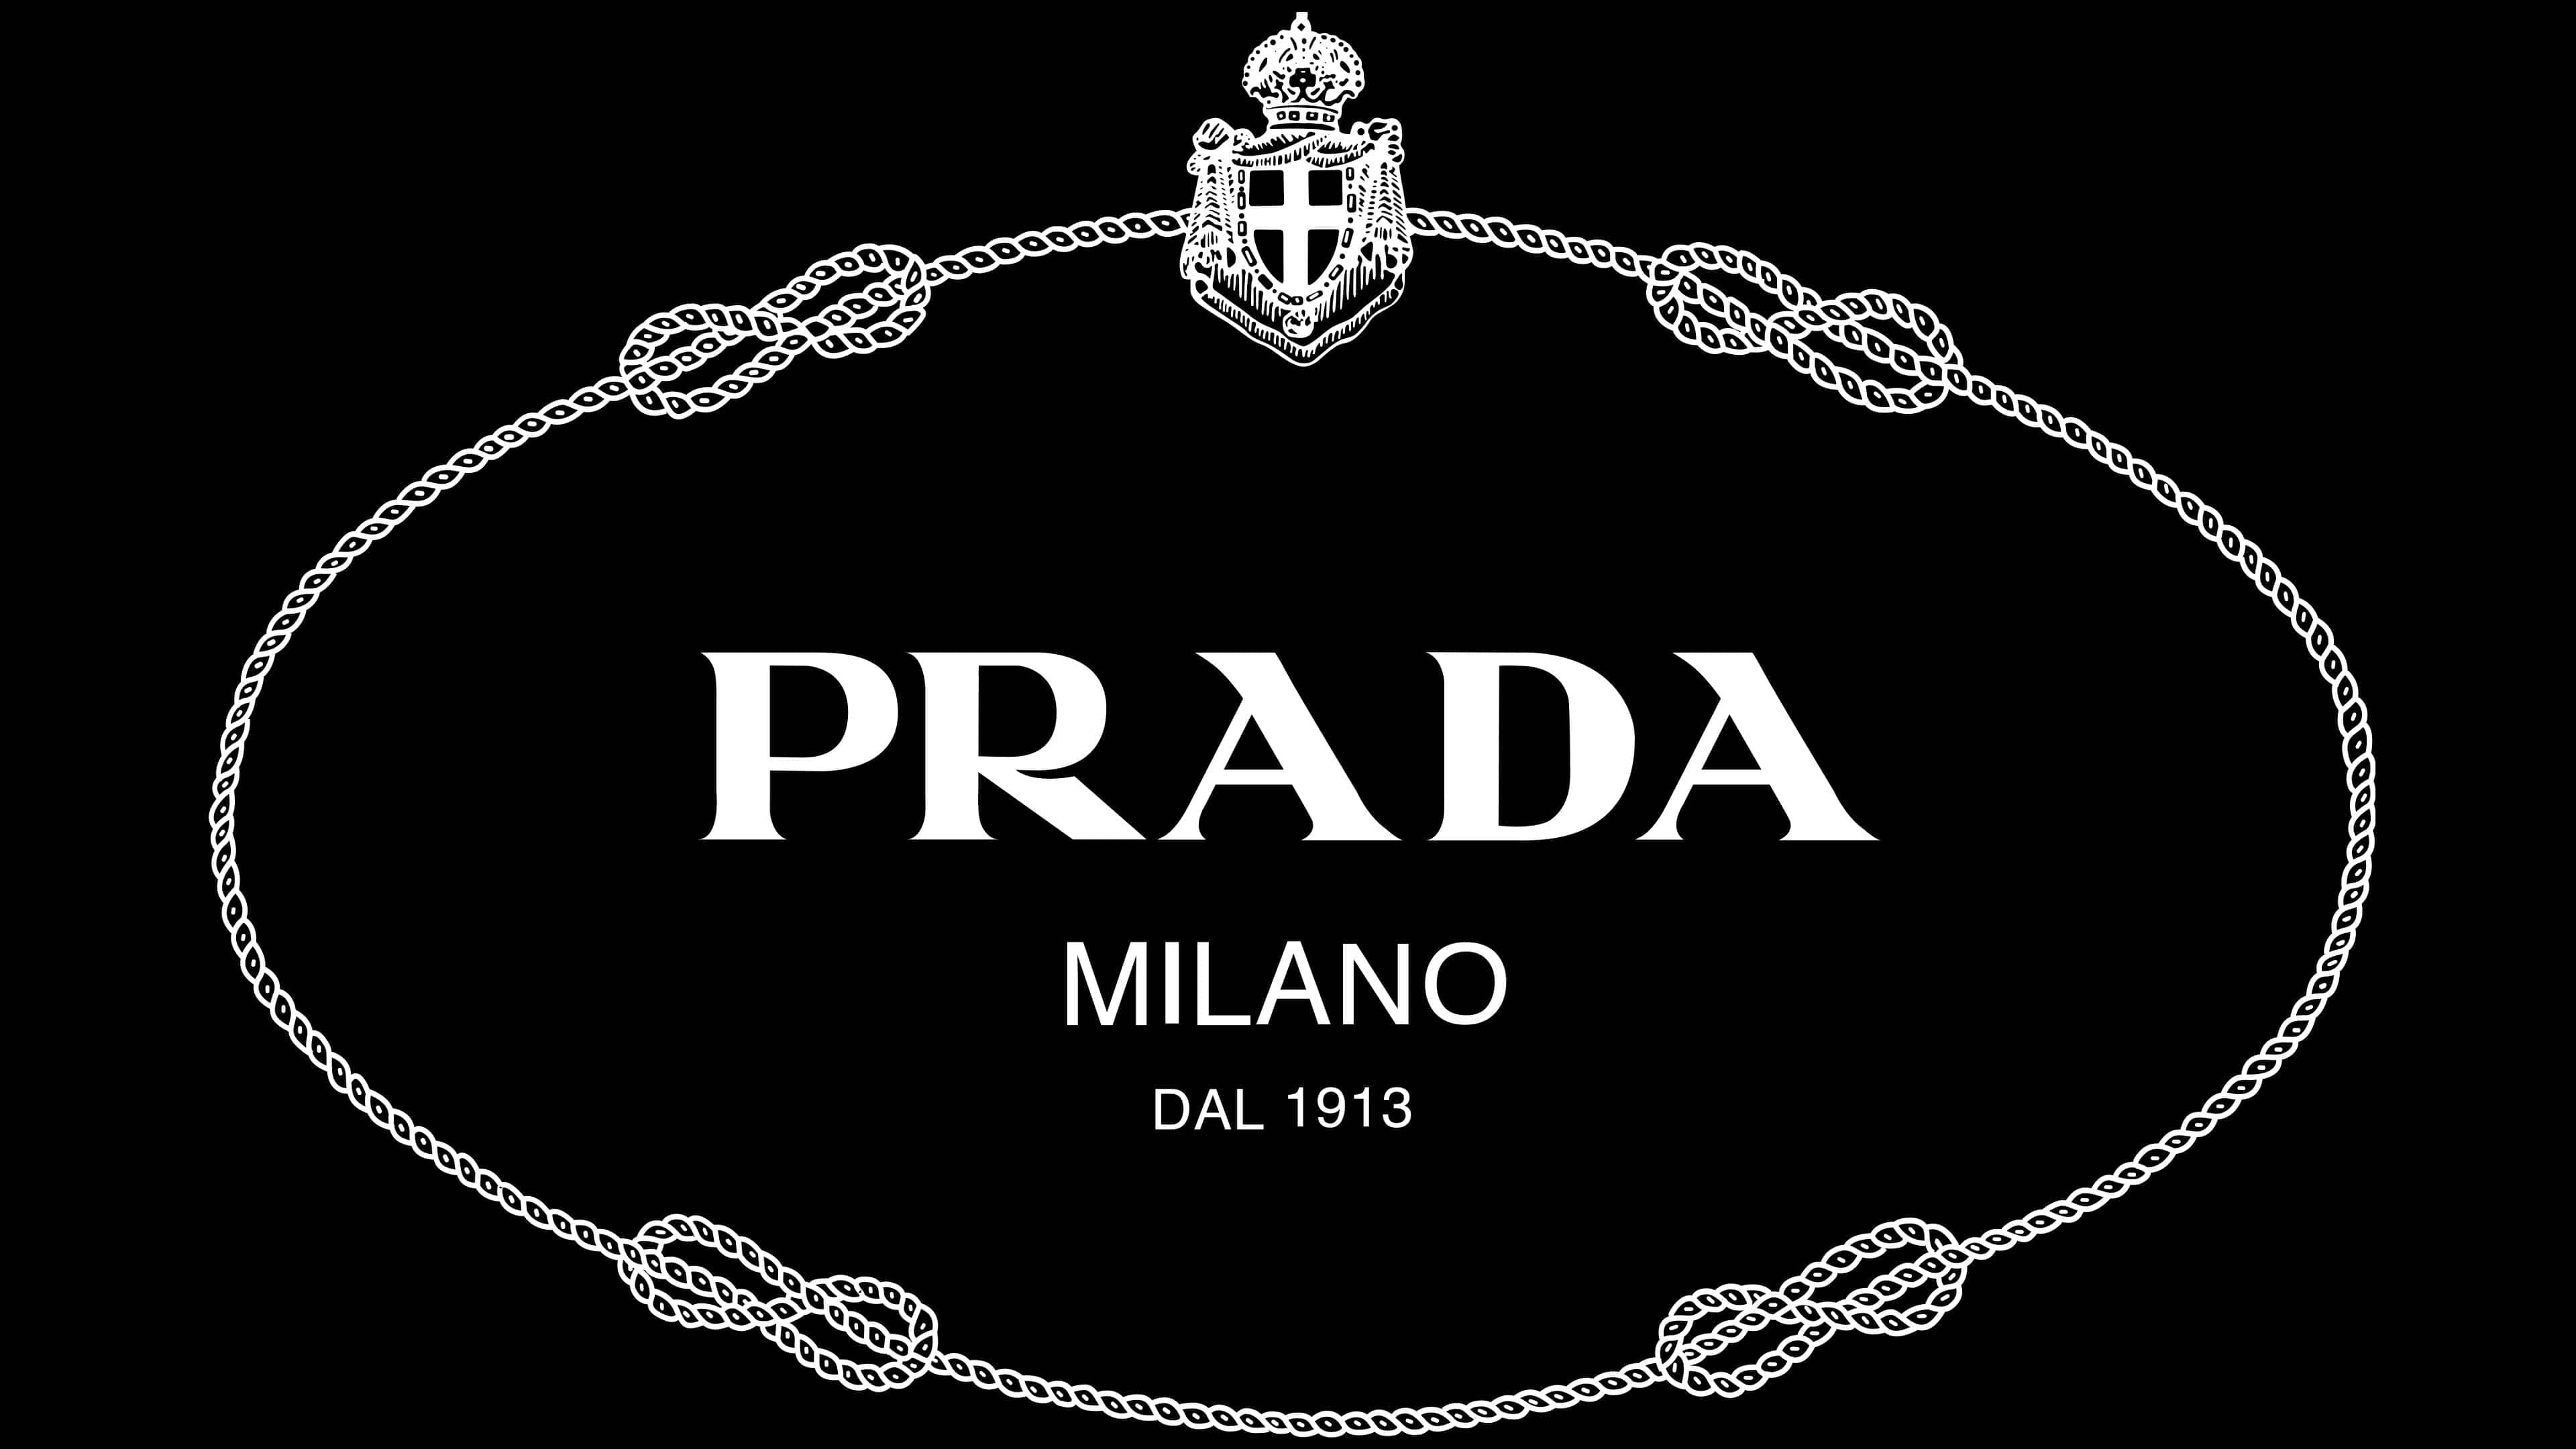 Prada: The top-selling fashion brands in the world, Emblem. 3840x2160 4K Wallpaper.